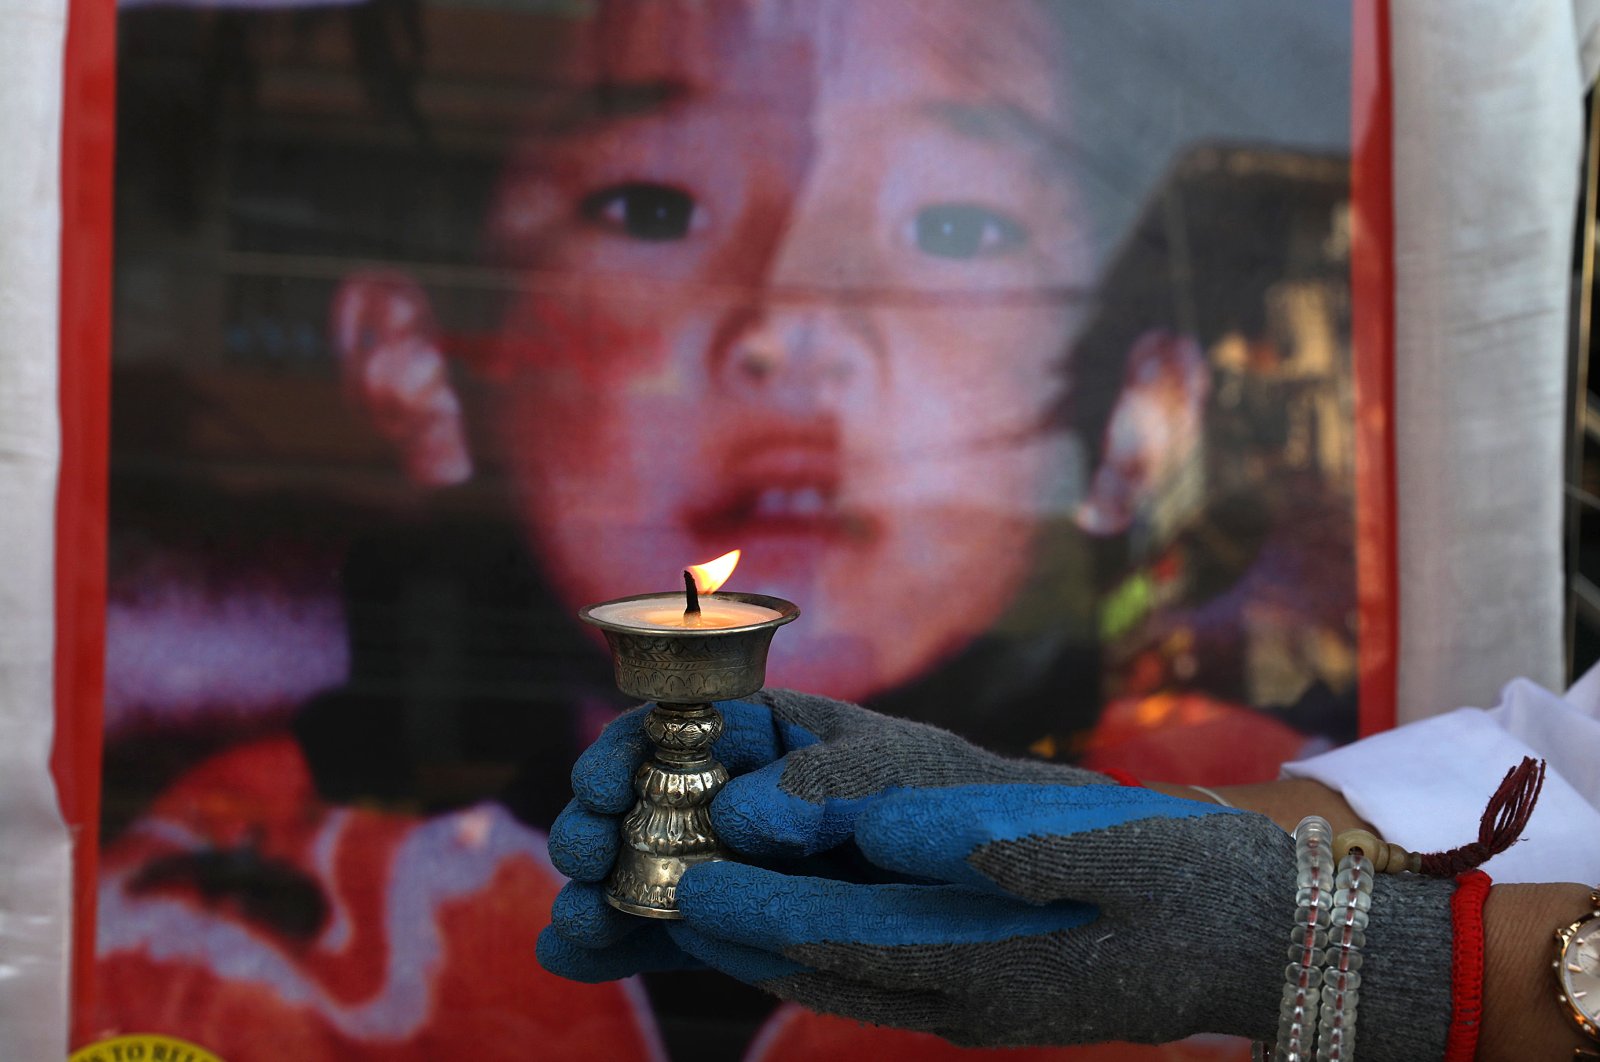 A Tibetan woman living in exile and a member of the Tibetan Women's Association lights a butter lamp during an event to mark the 31st birthday of Panchen Lama in McLeod Ganj, near Dharamsala, India, April 25, 2020.(EPA Photo)